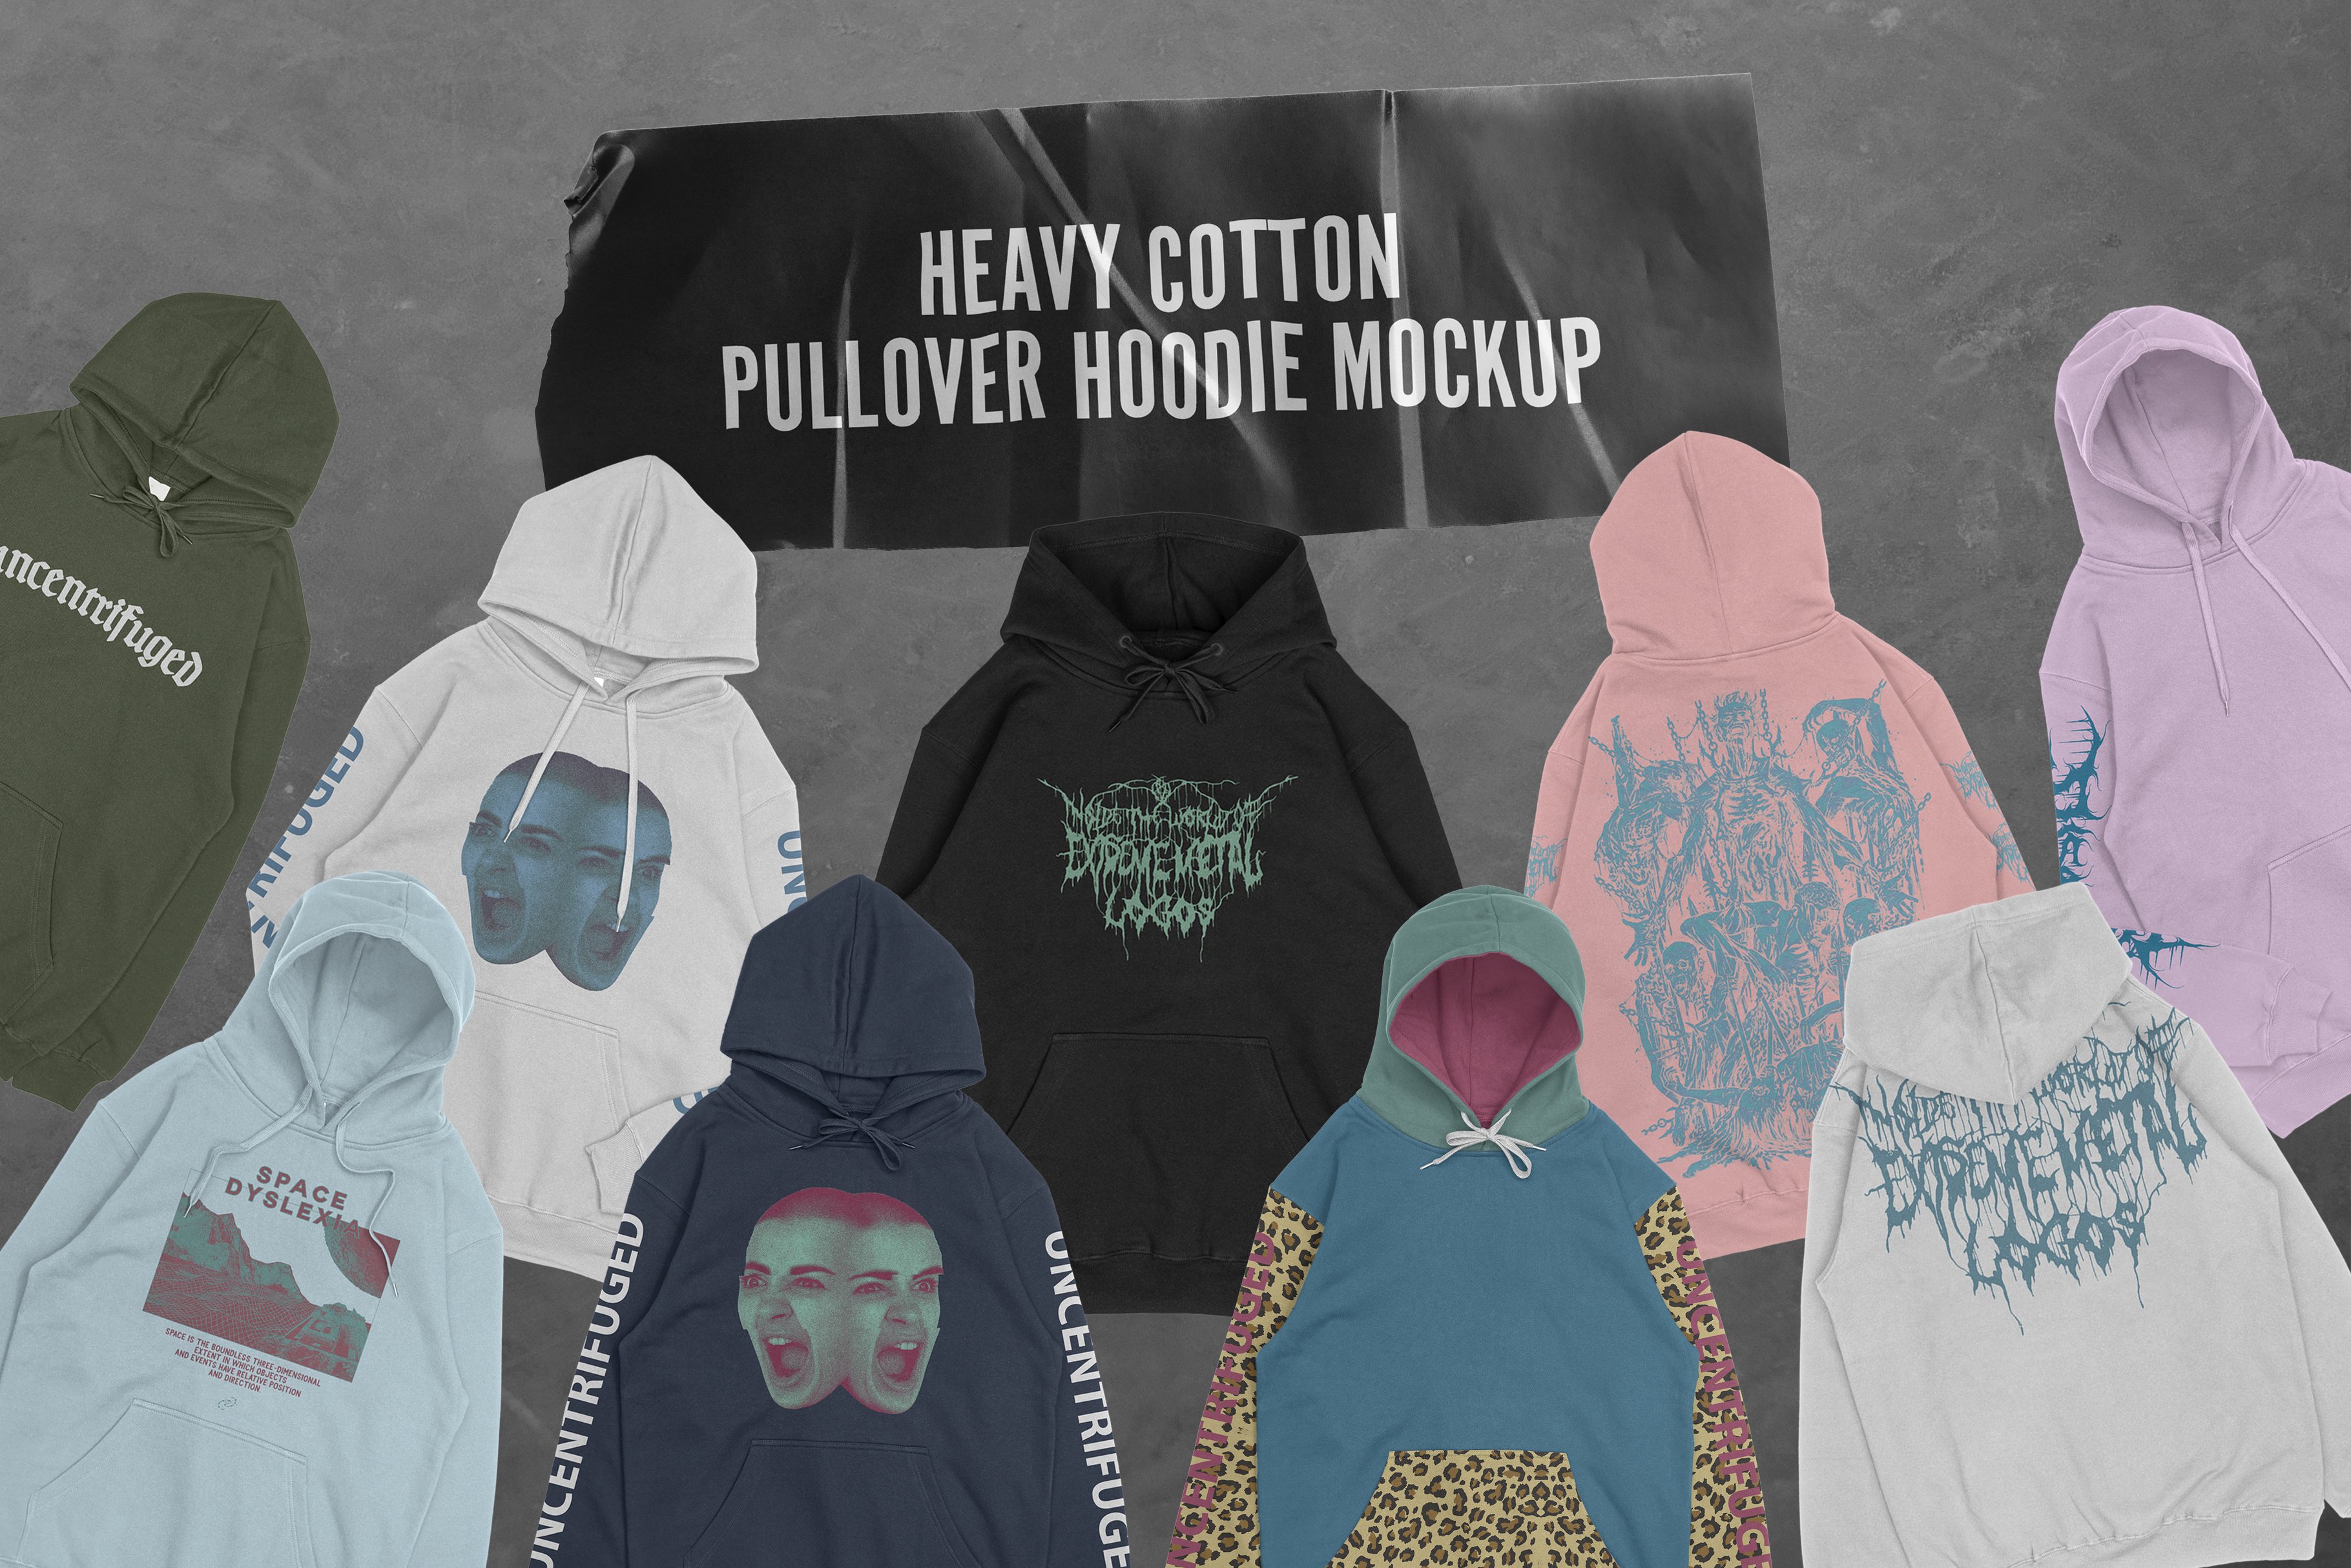 Heavy Cotton Pullover Hoodie Mockup cover image.